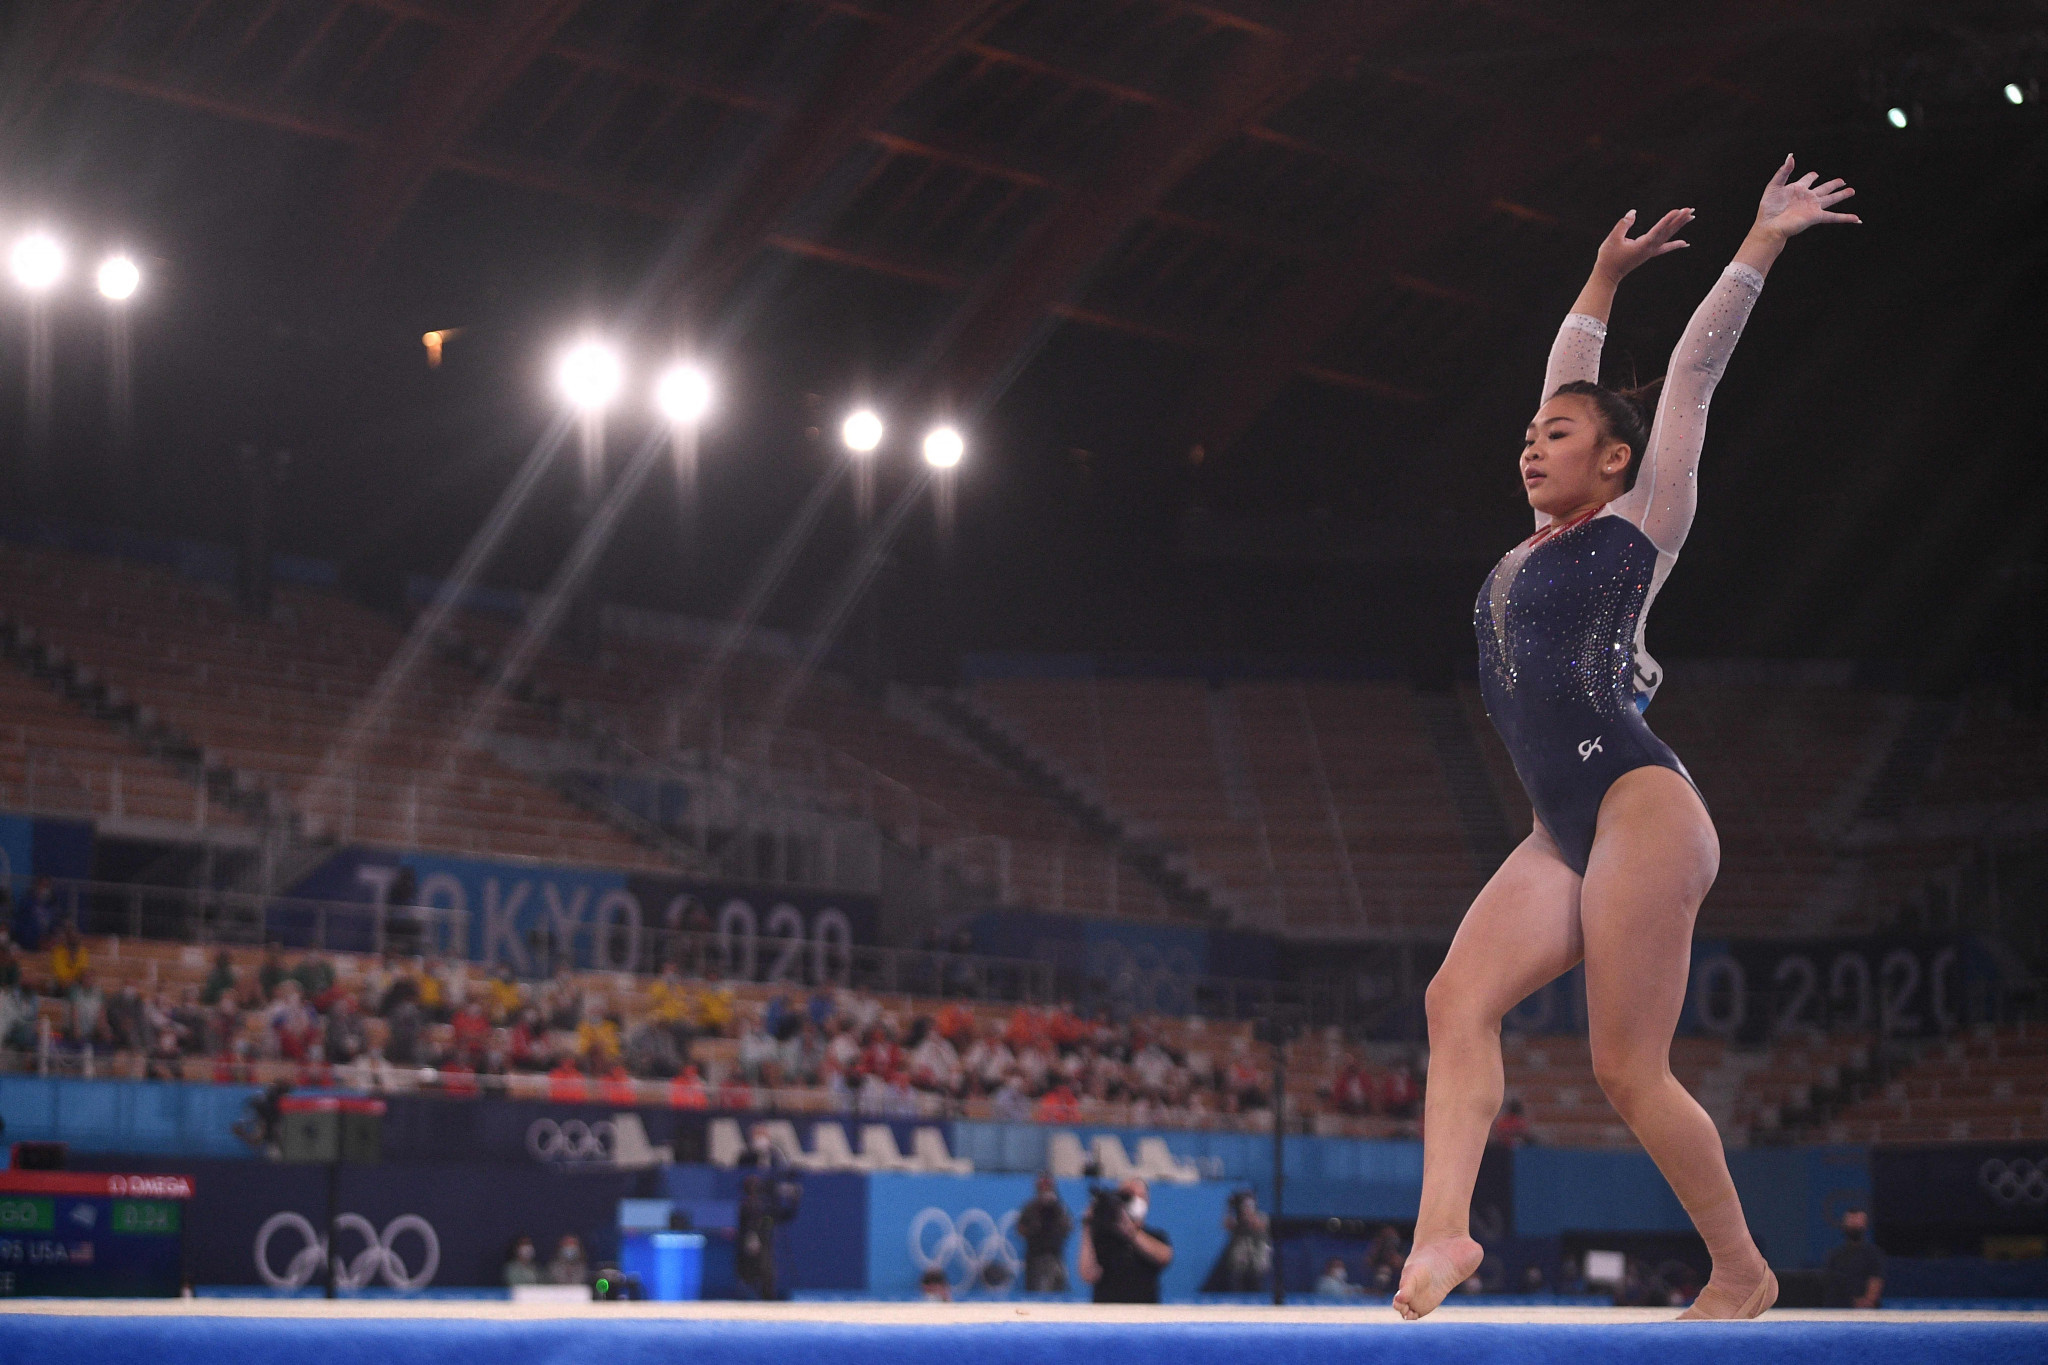 Olympic all-around champion Lee resumes training in pursuit of Paris 2024